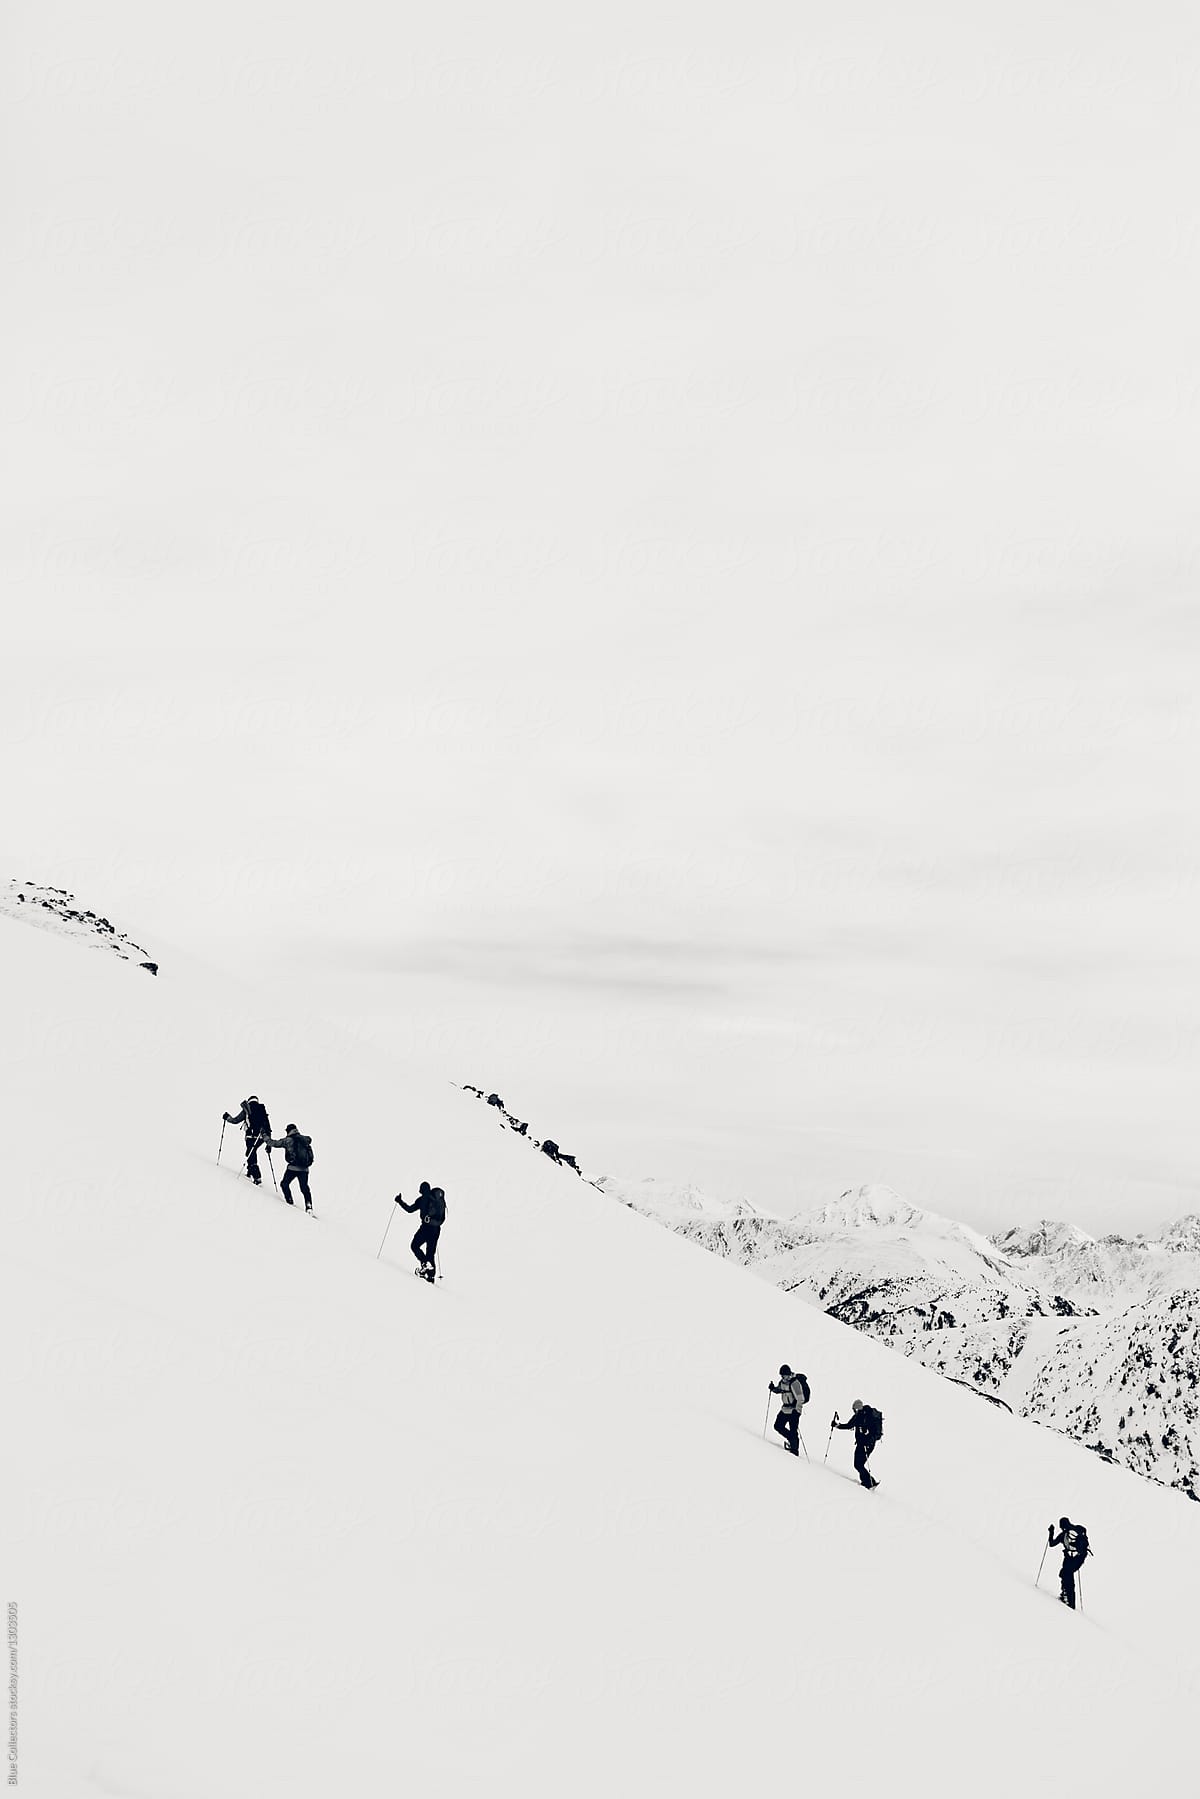 Group of mountaineers walking towards snowy mountains in the Pyrenees